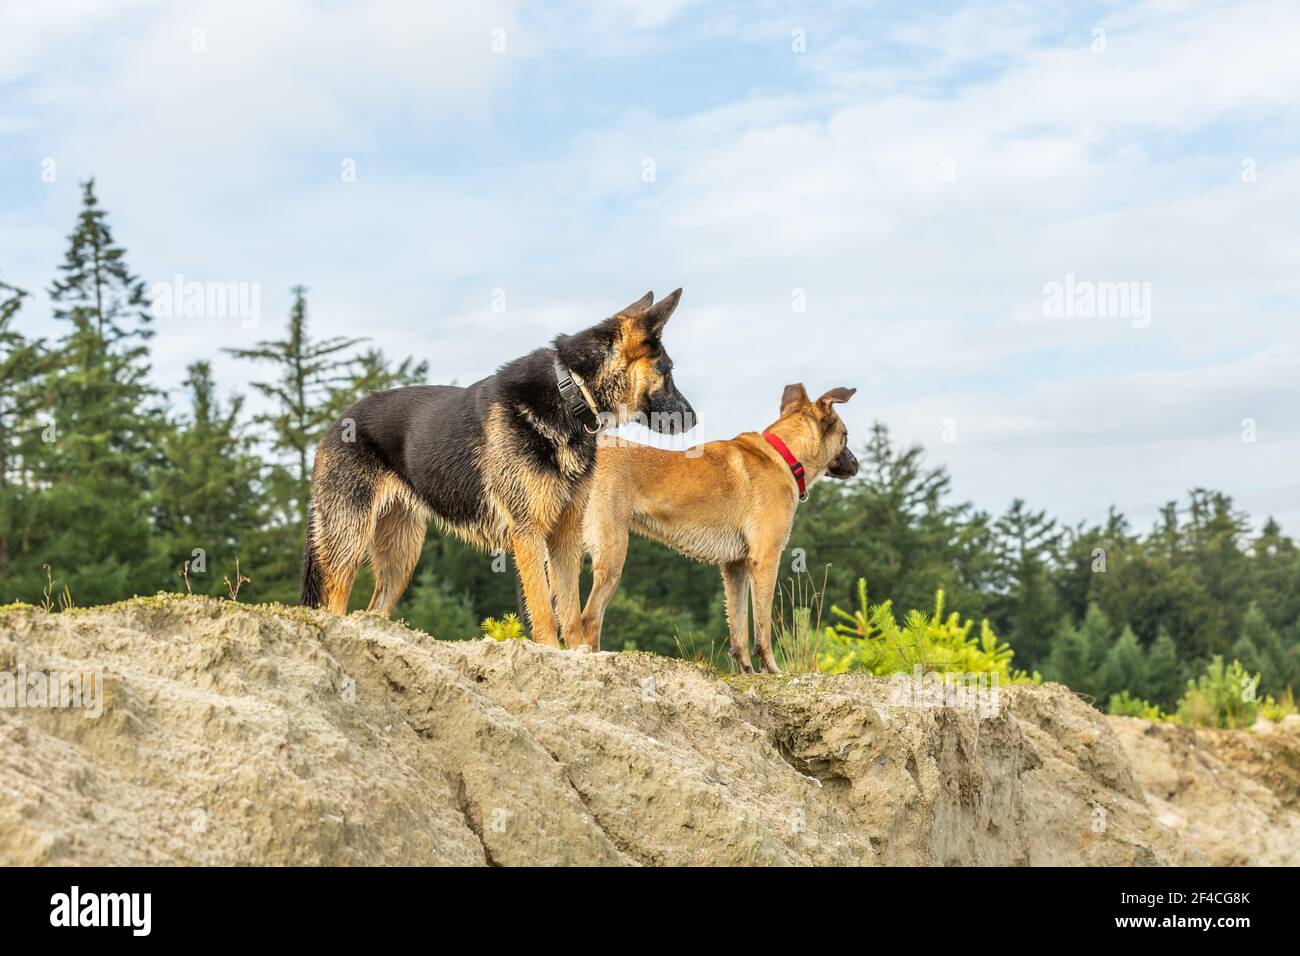 A beautiful German Shepherd and a Malinois are on a sand dune and looks down to the photographer with beautiful upright ears and a fierce glance with Stock Photo